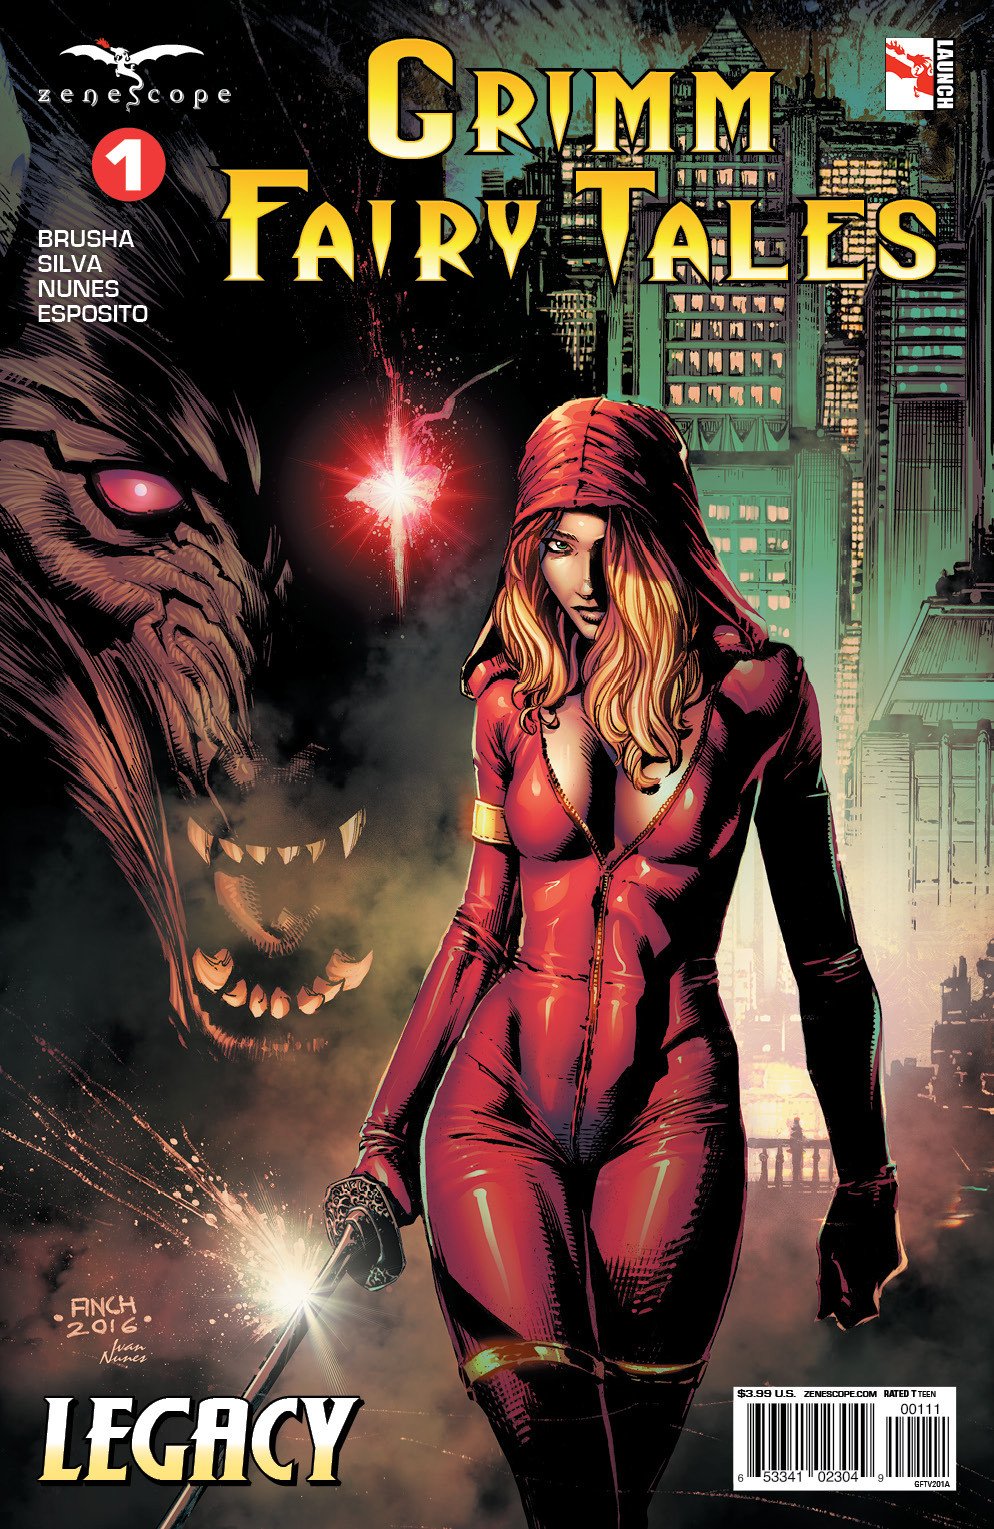 Image of Grimm Fairy Tales: Vol. 2 #1